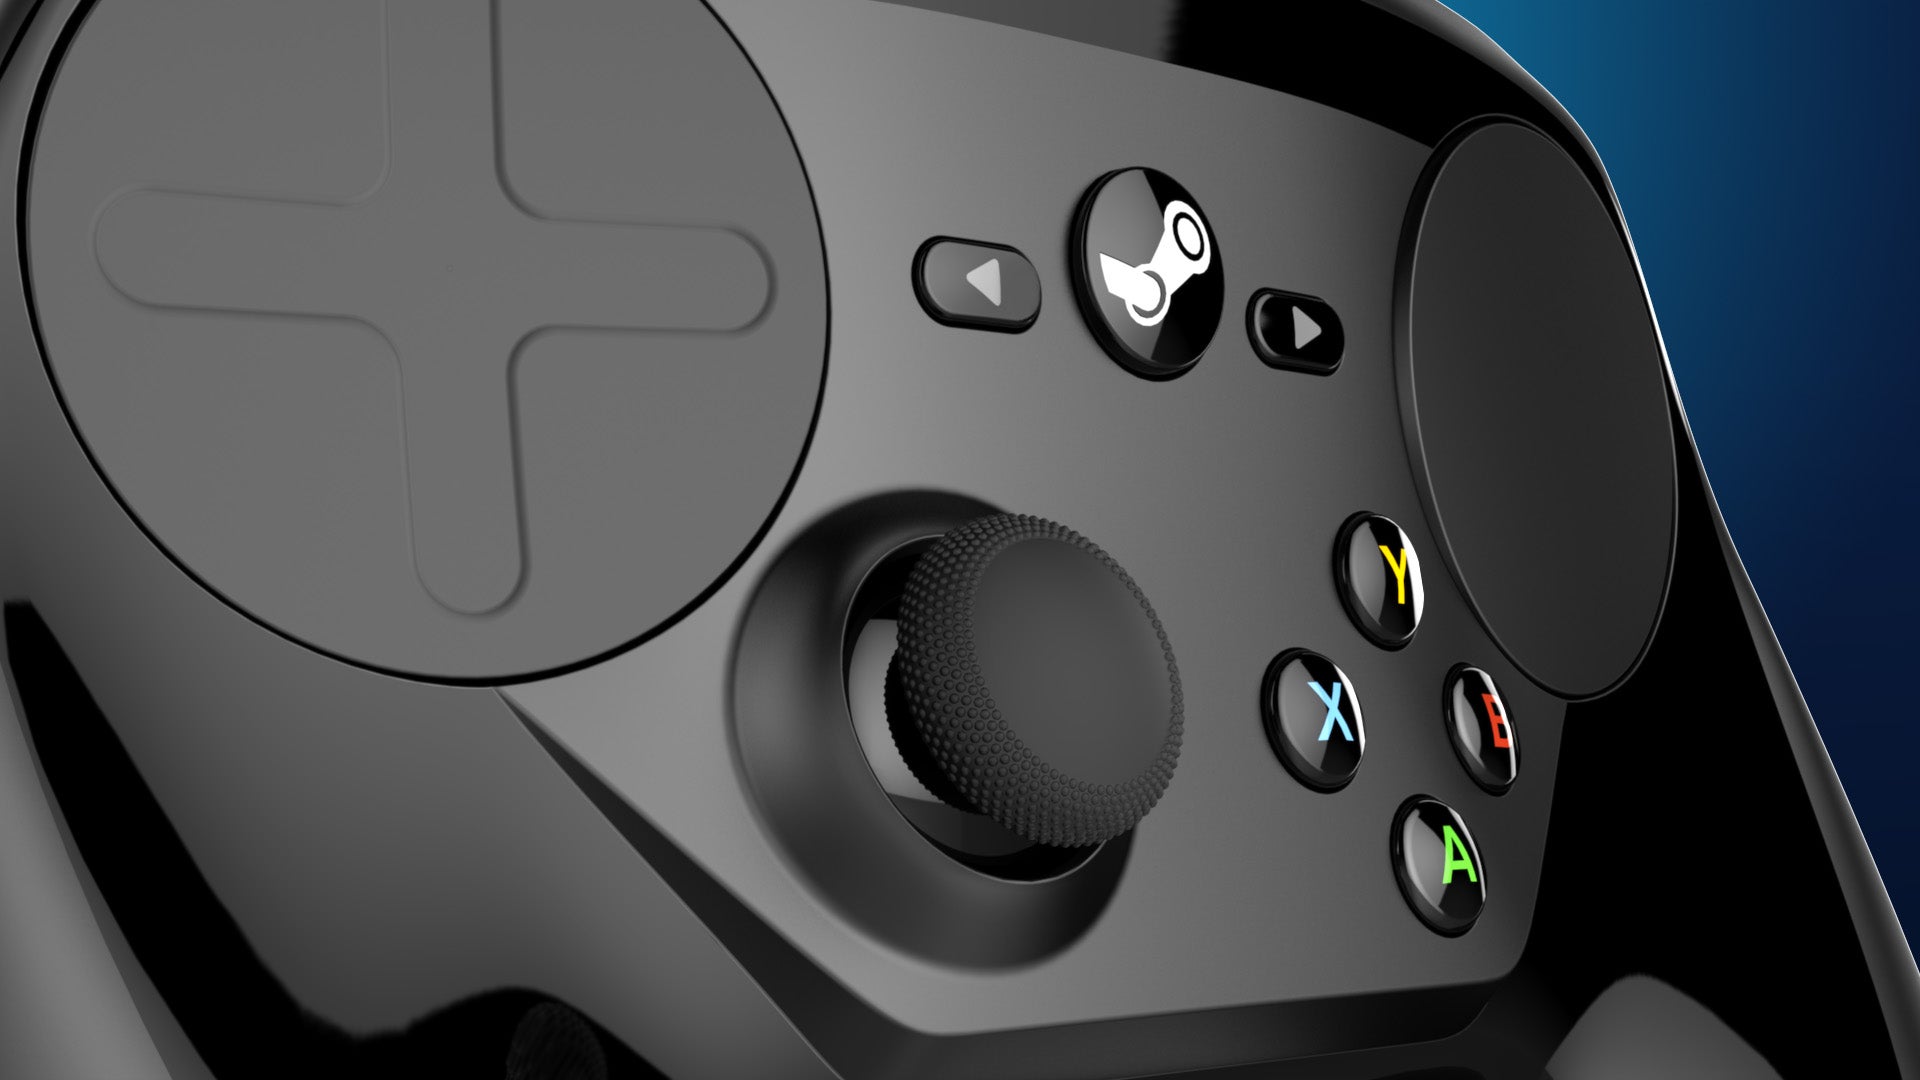 Image for Steam Machines no longer support Suspend/Resume feature due to reliability issues